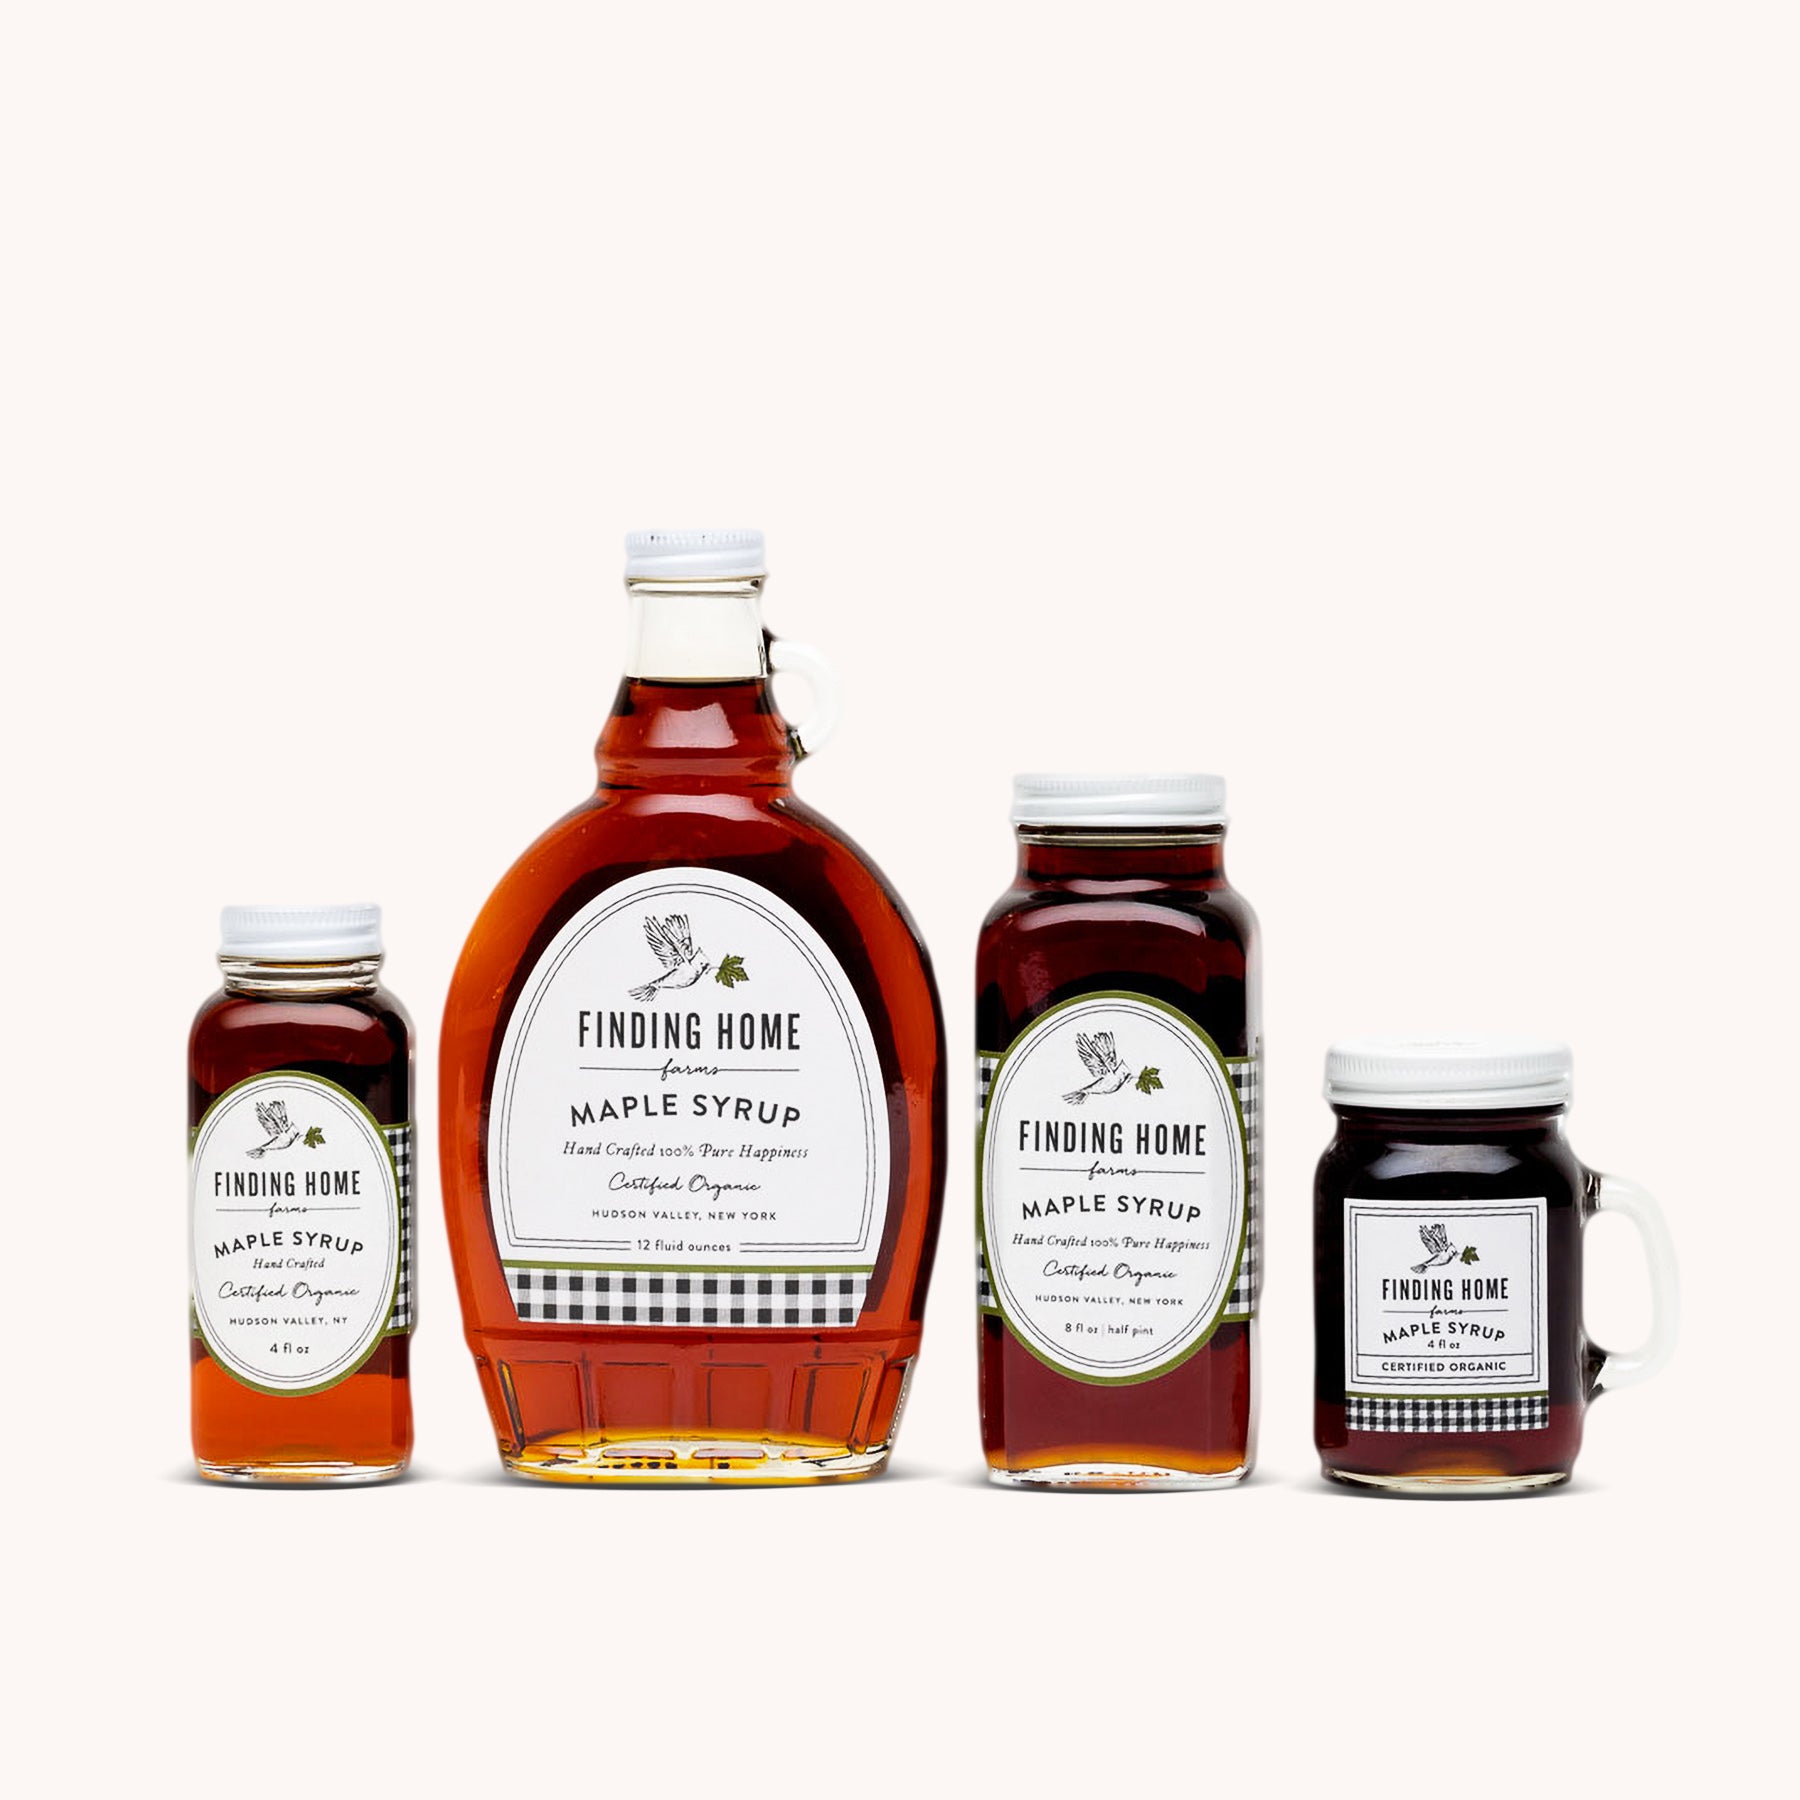 Why Use Glass Bottles for Pure Maple Syrup?